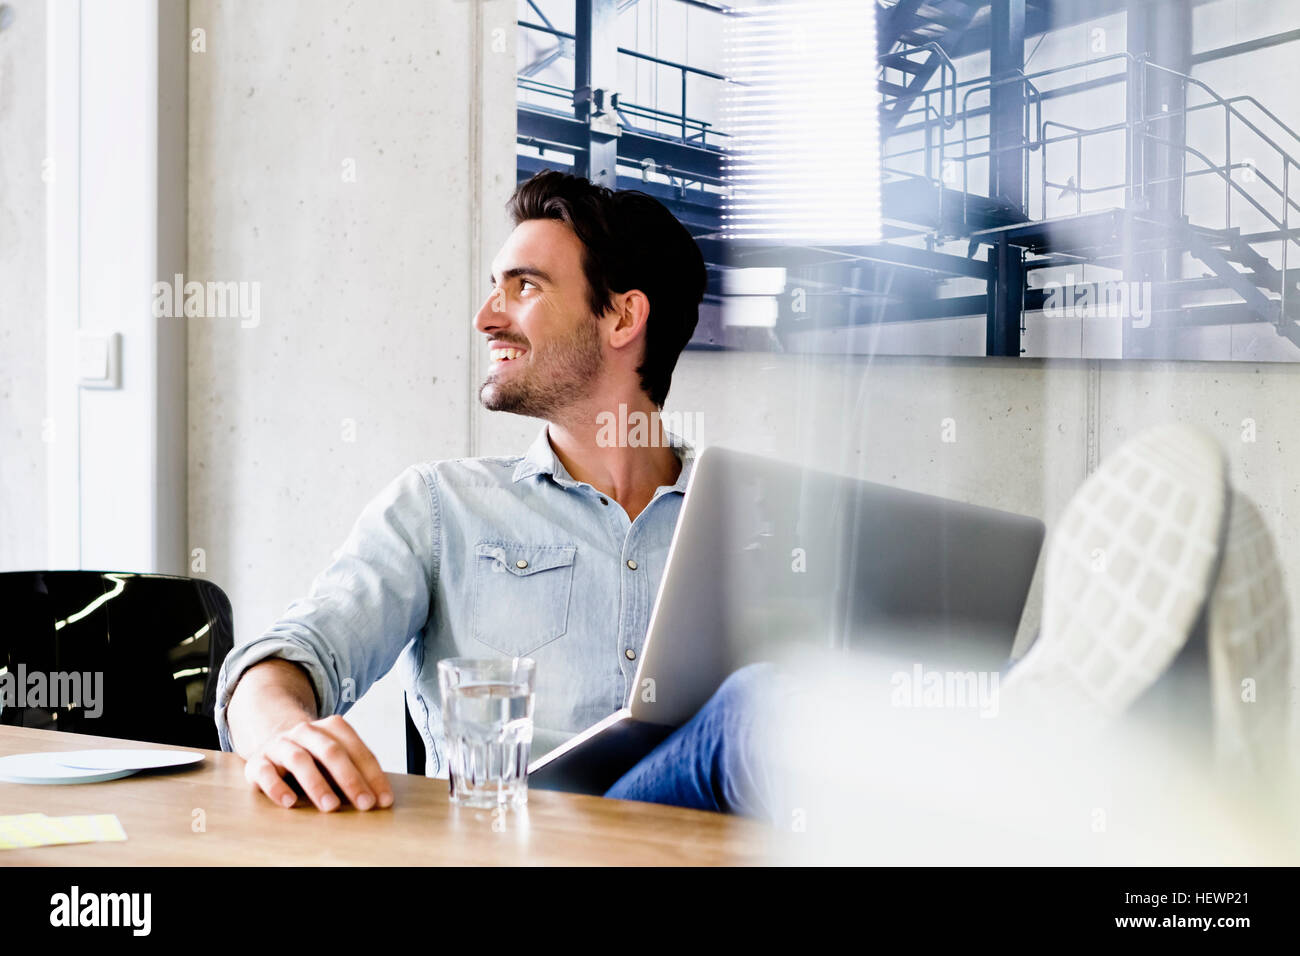 Business man in office feet up on desk, using laptop looking away smiling Stock Photo